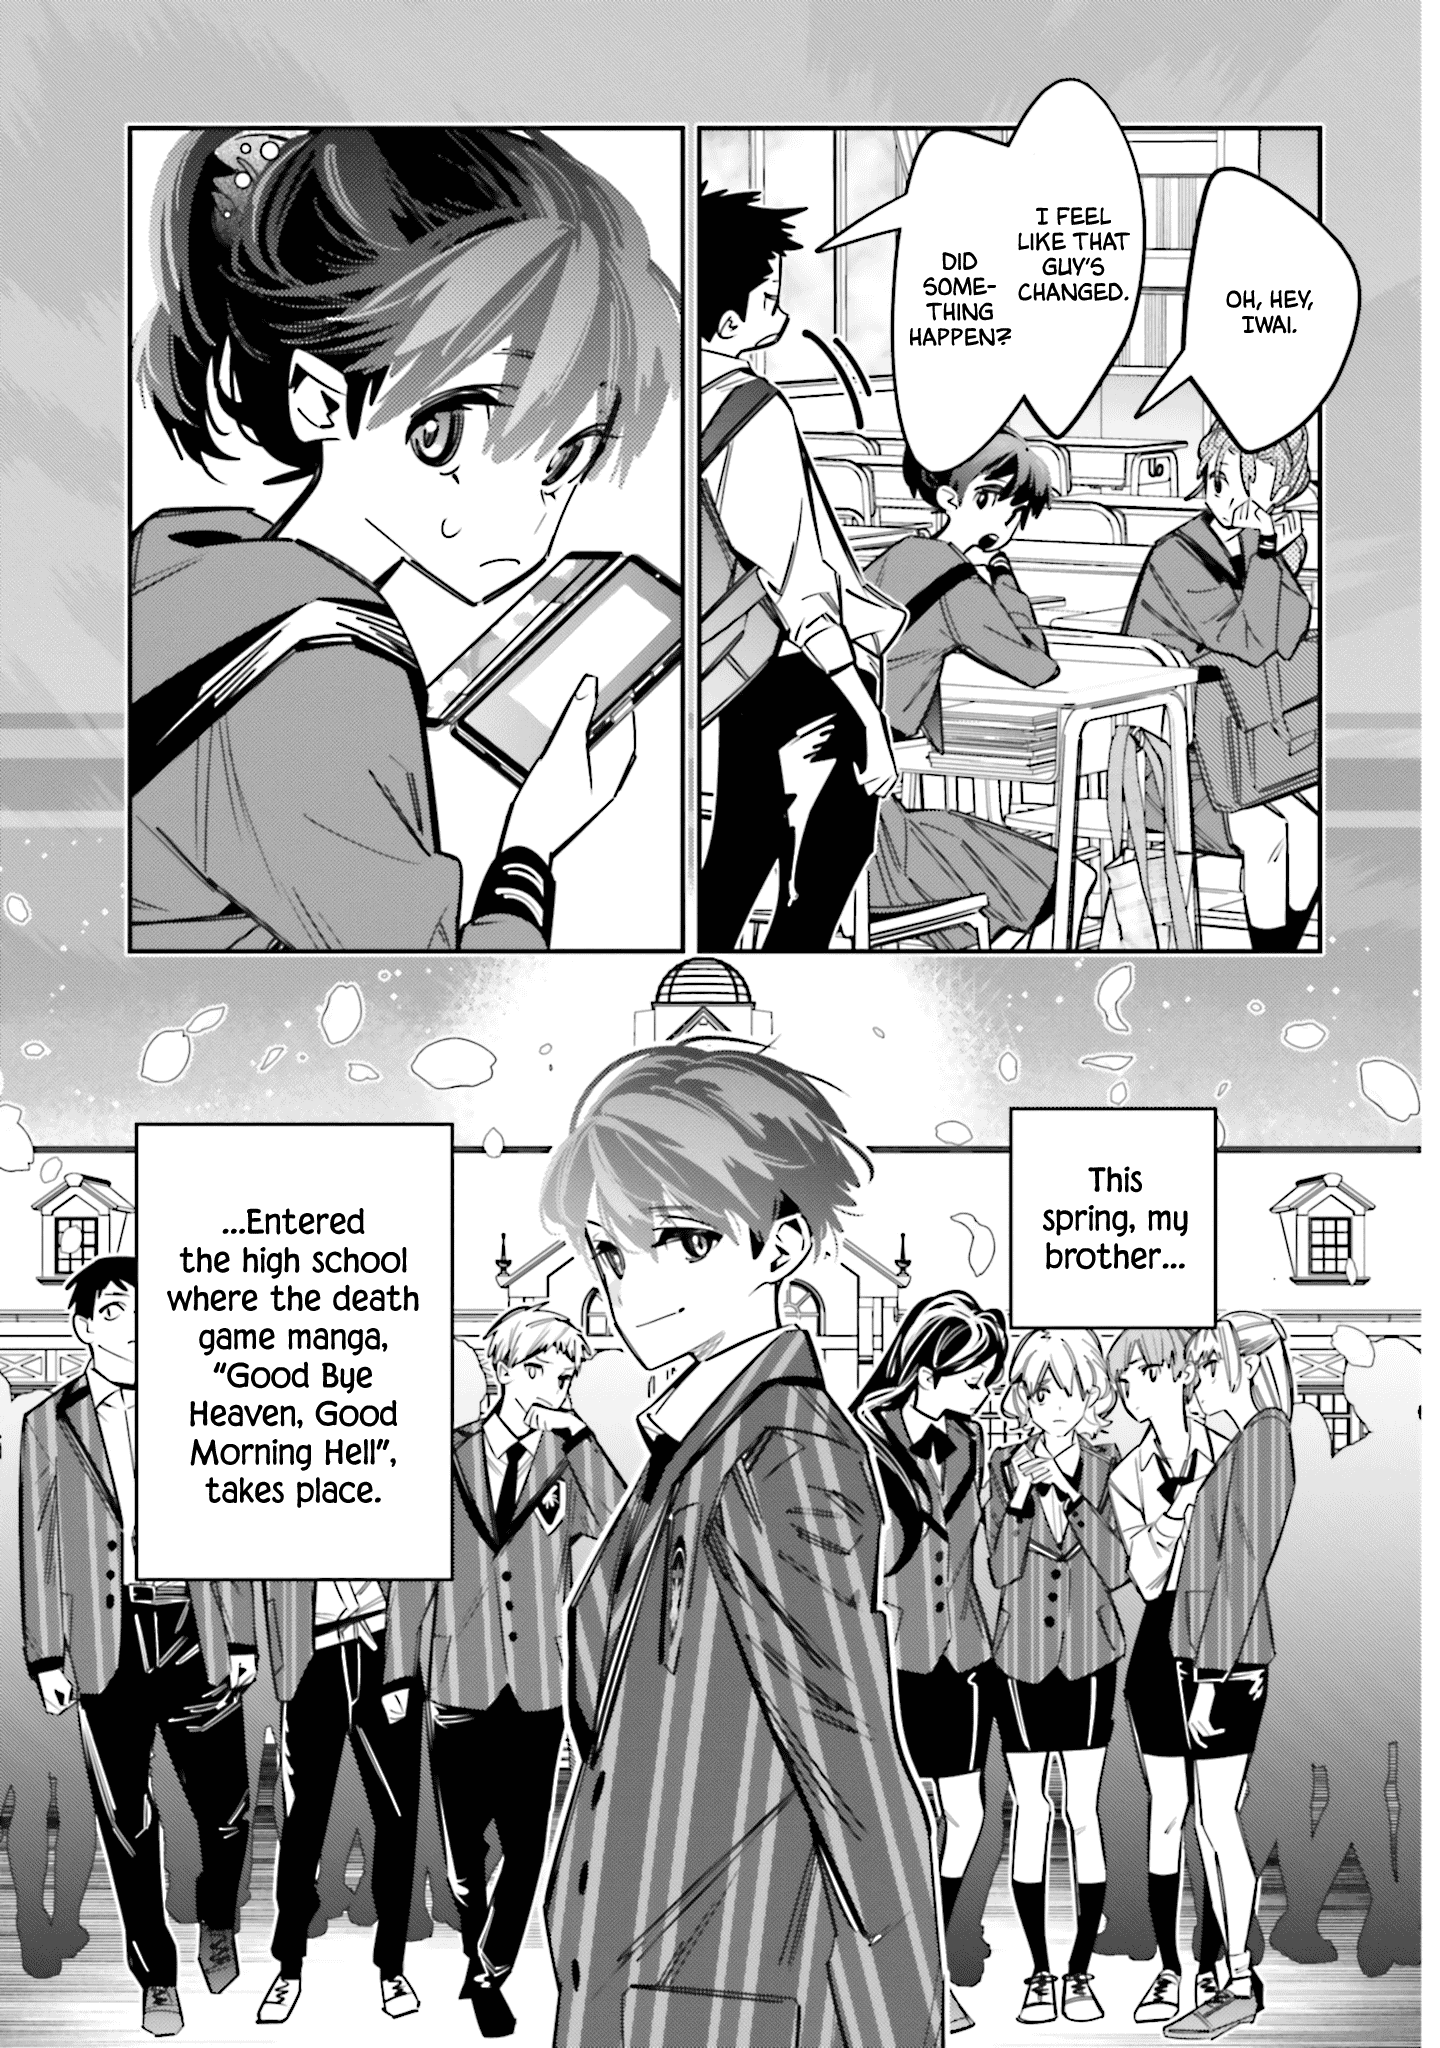 I Reincarnated As The Little Sister Of A Death Game Manga's Murder Mastermind And Failed Chapter 7 #3